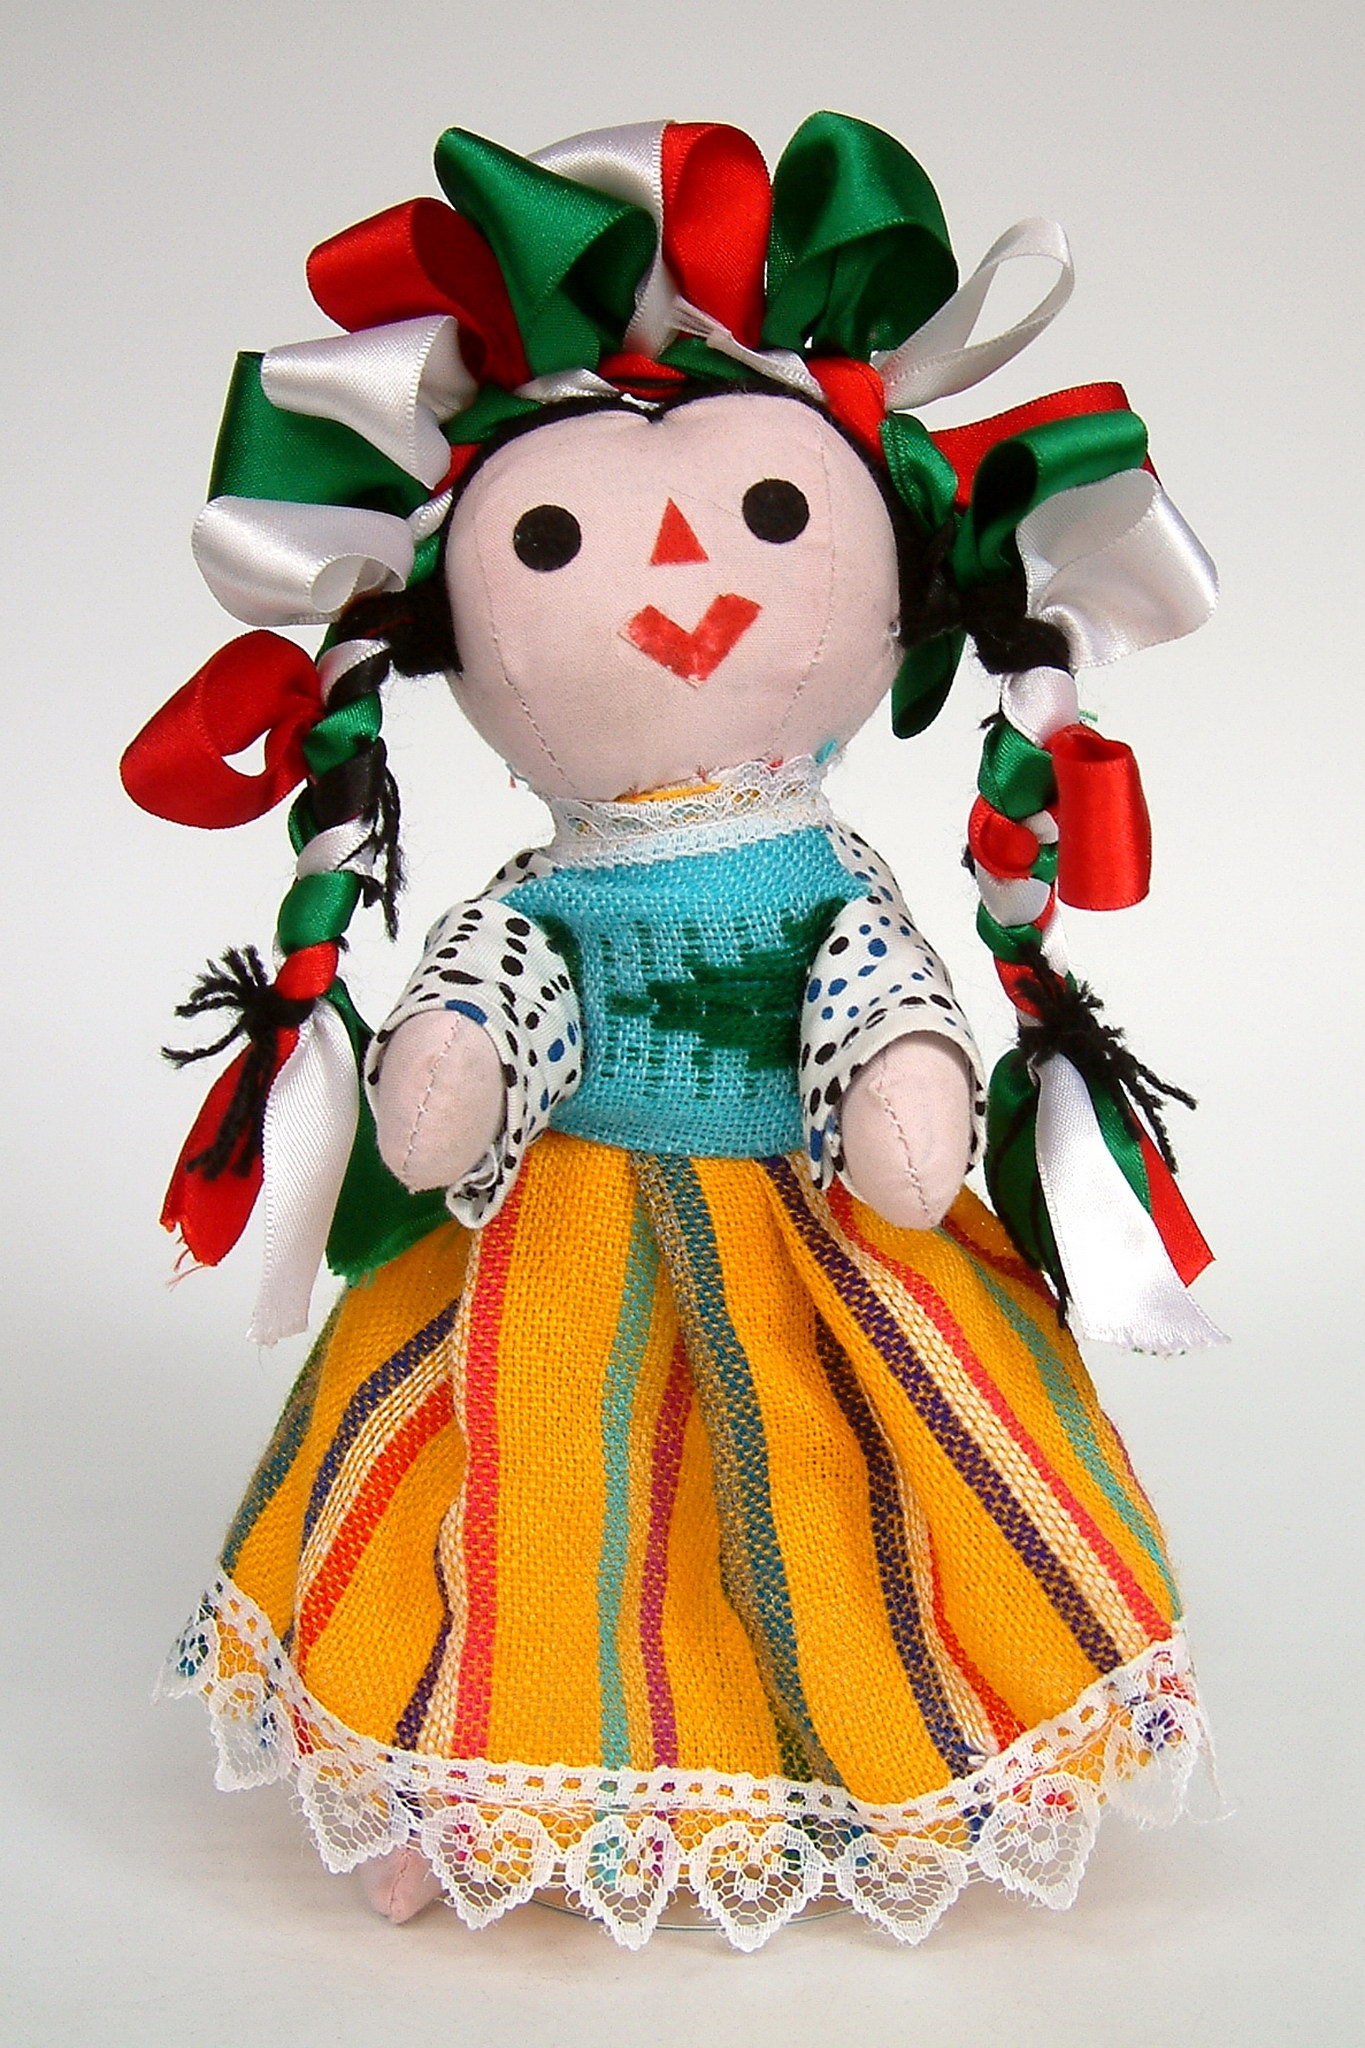 Mexico Dolls Puppets  National costume dolls from all over the world